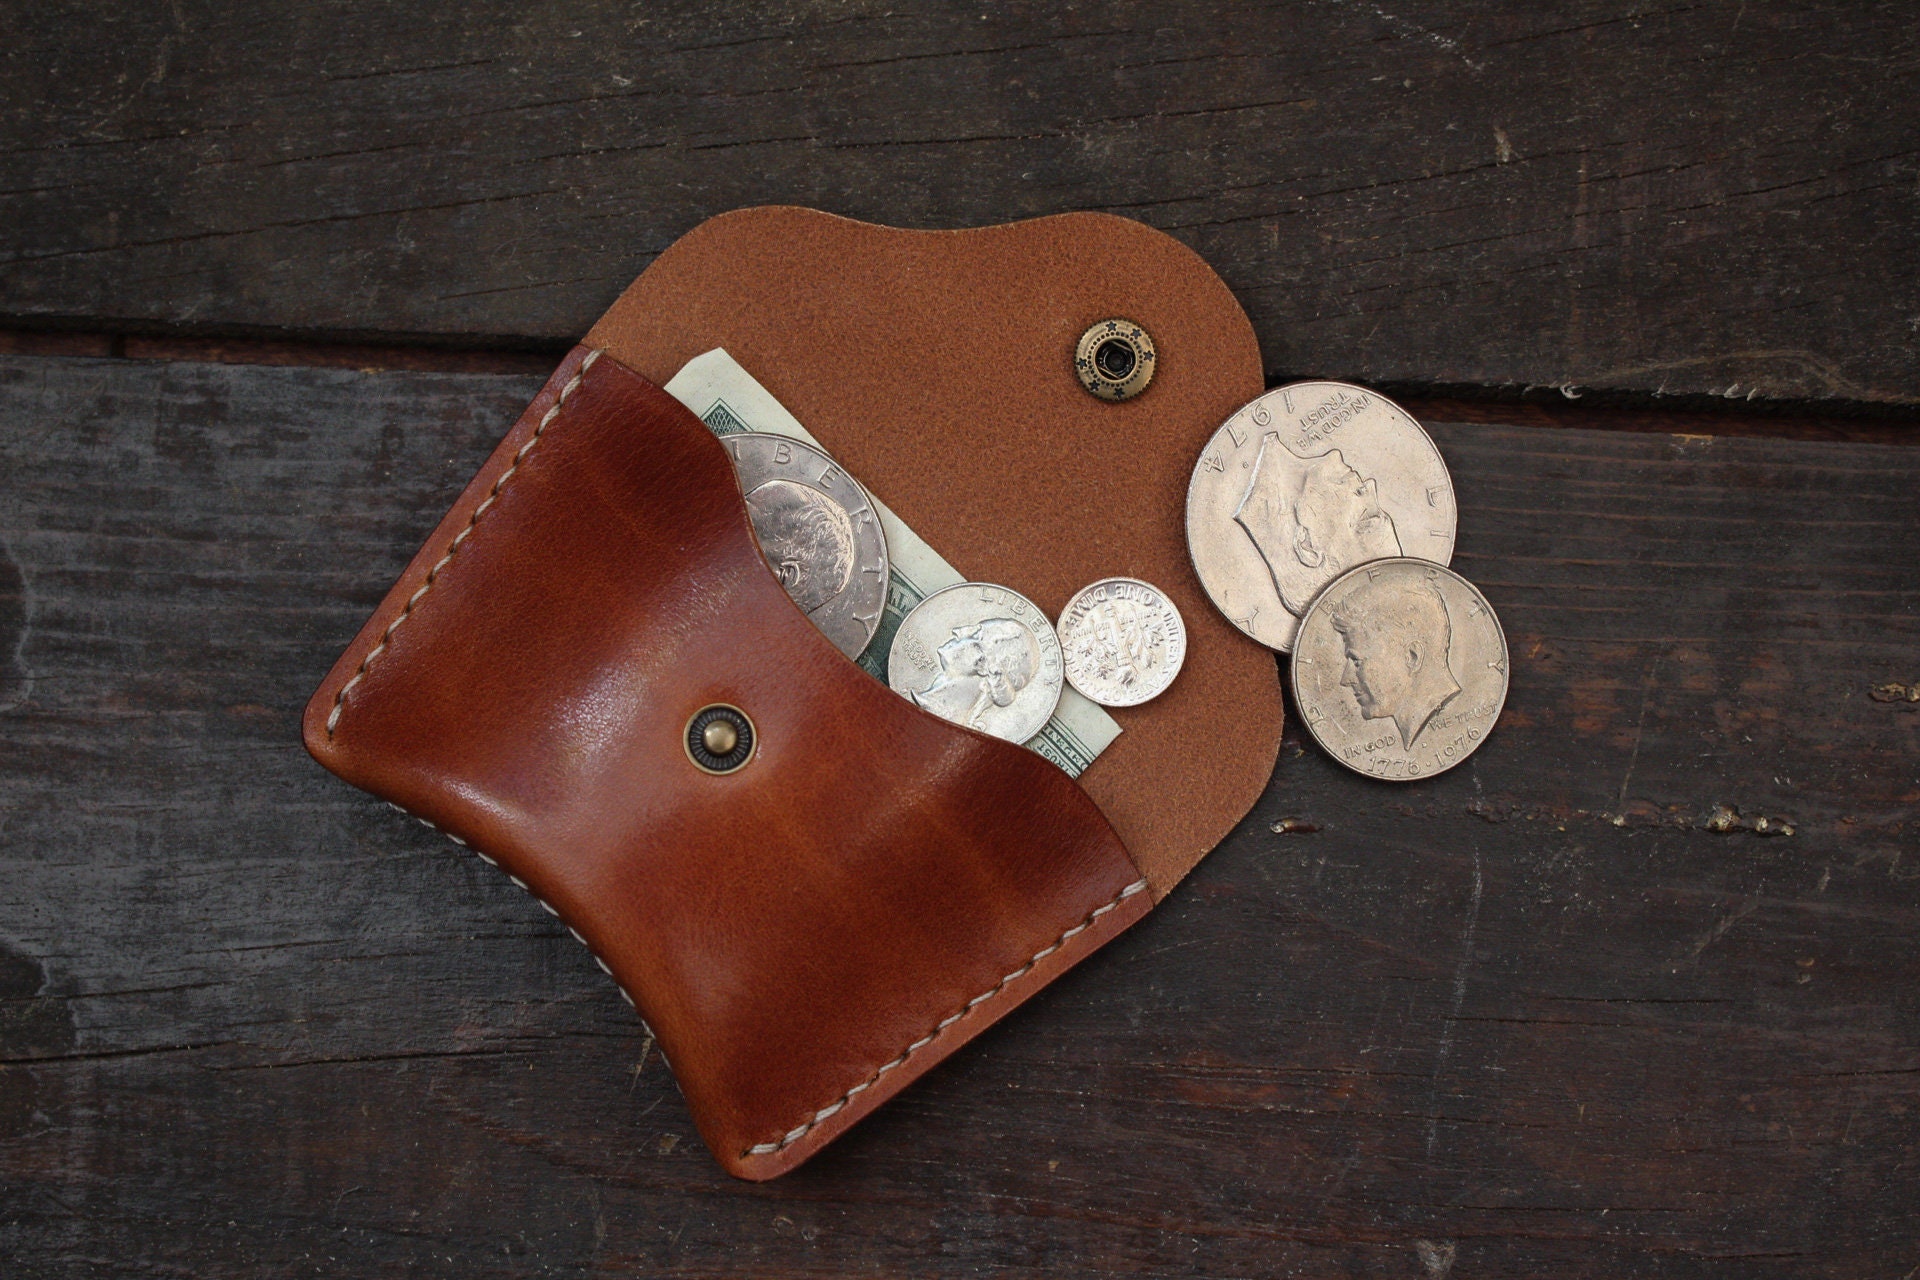 9 Unique Coin Purses You'll Want in Your Bag